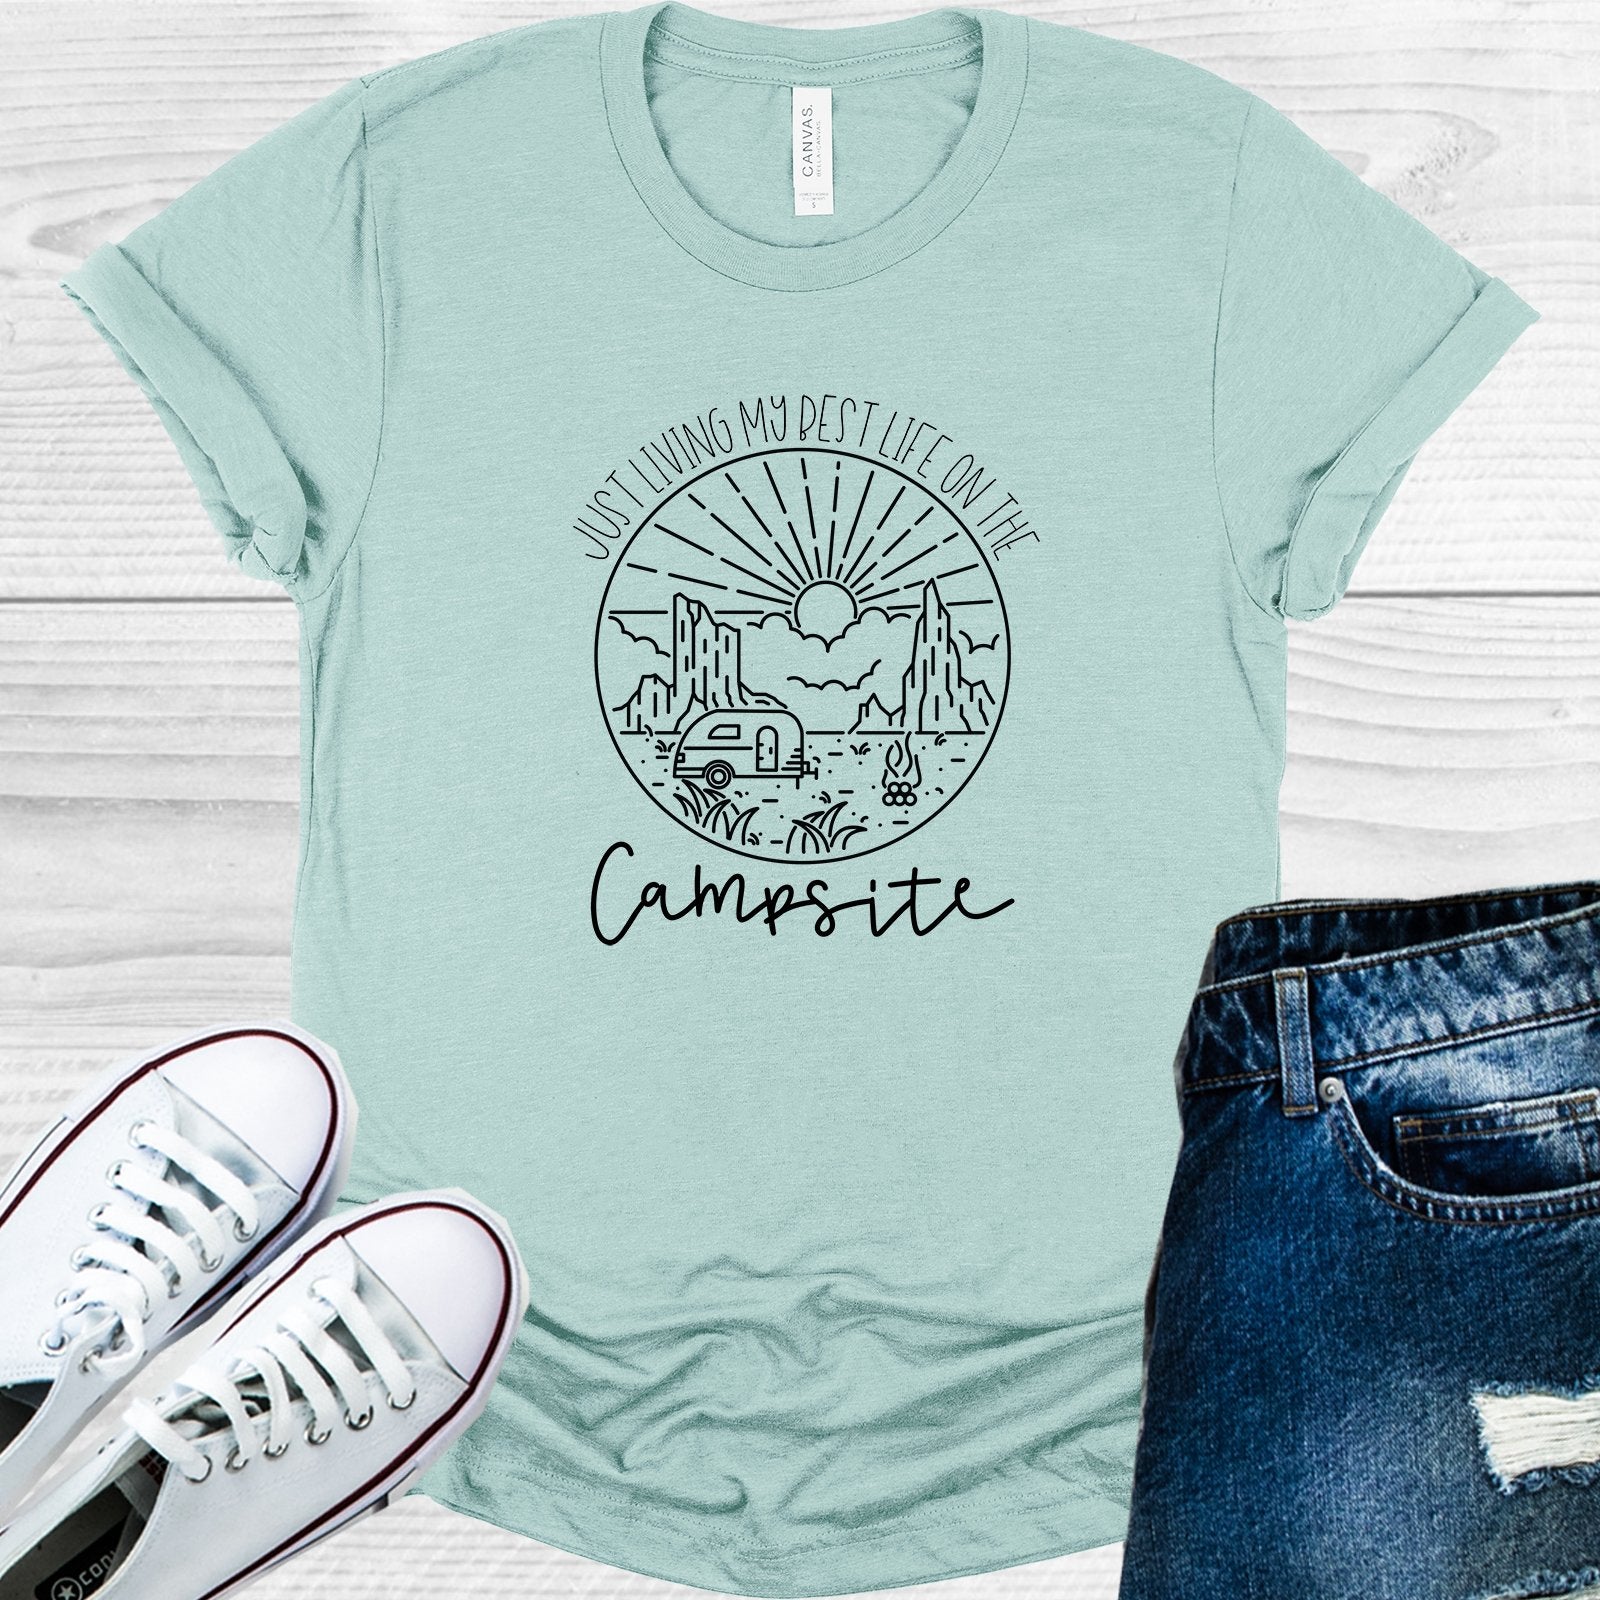 Just Living My Best Life On The Campsite Graphic Tee Graphic Tee